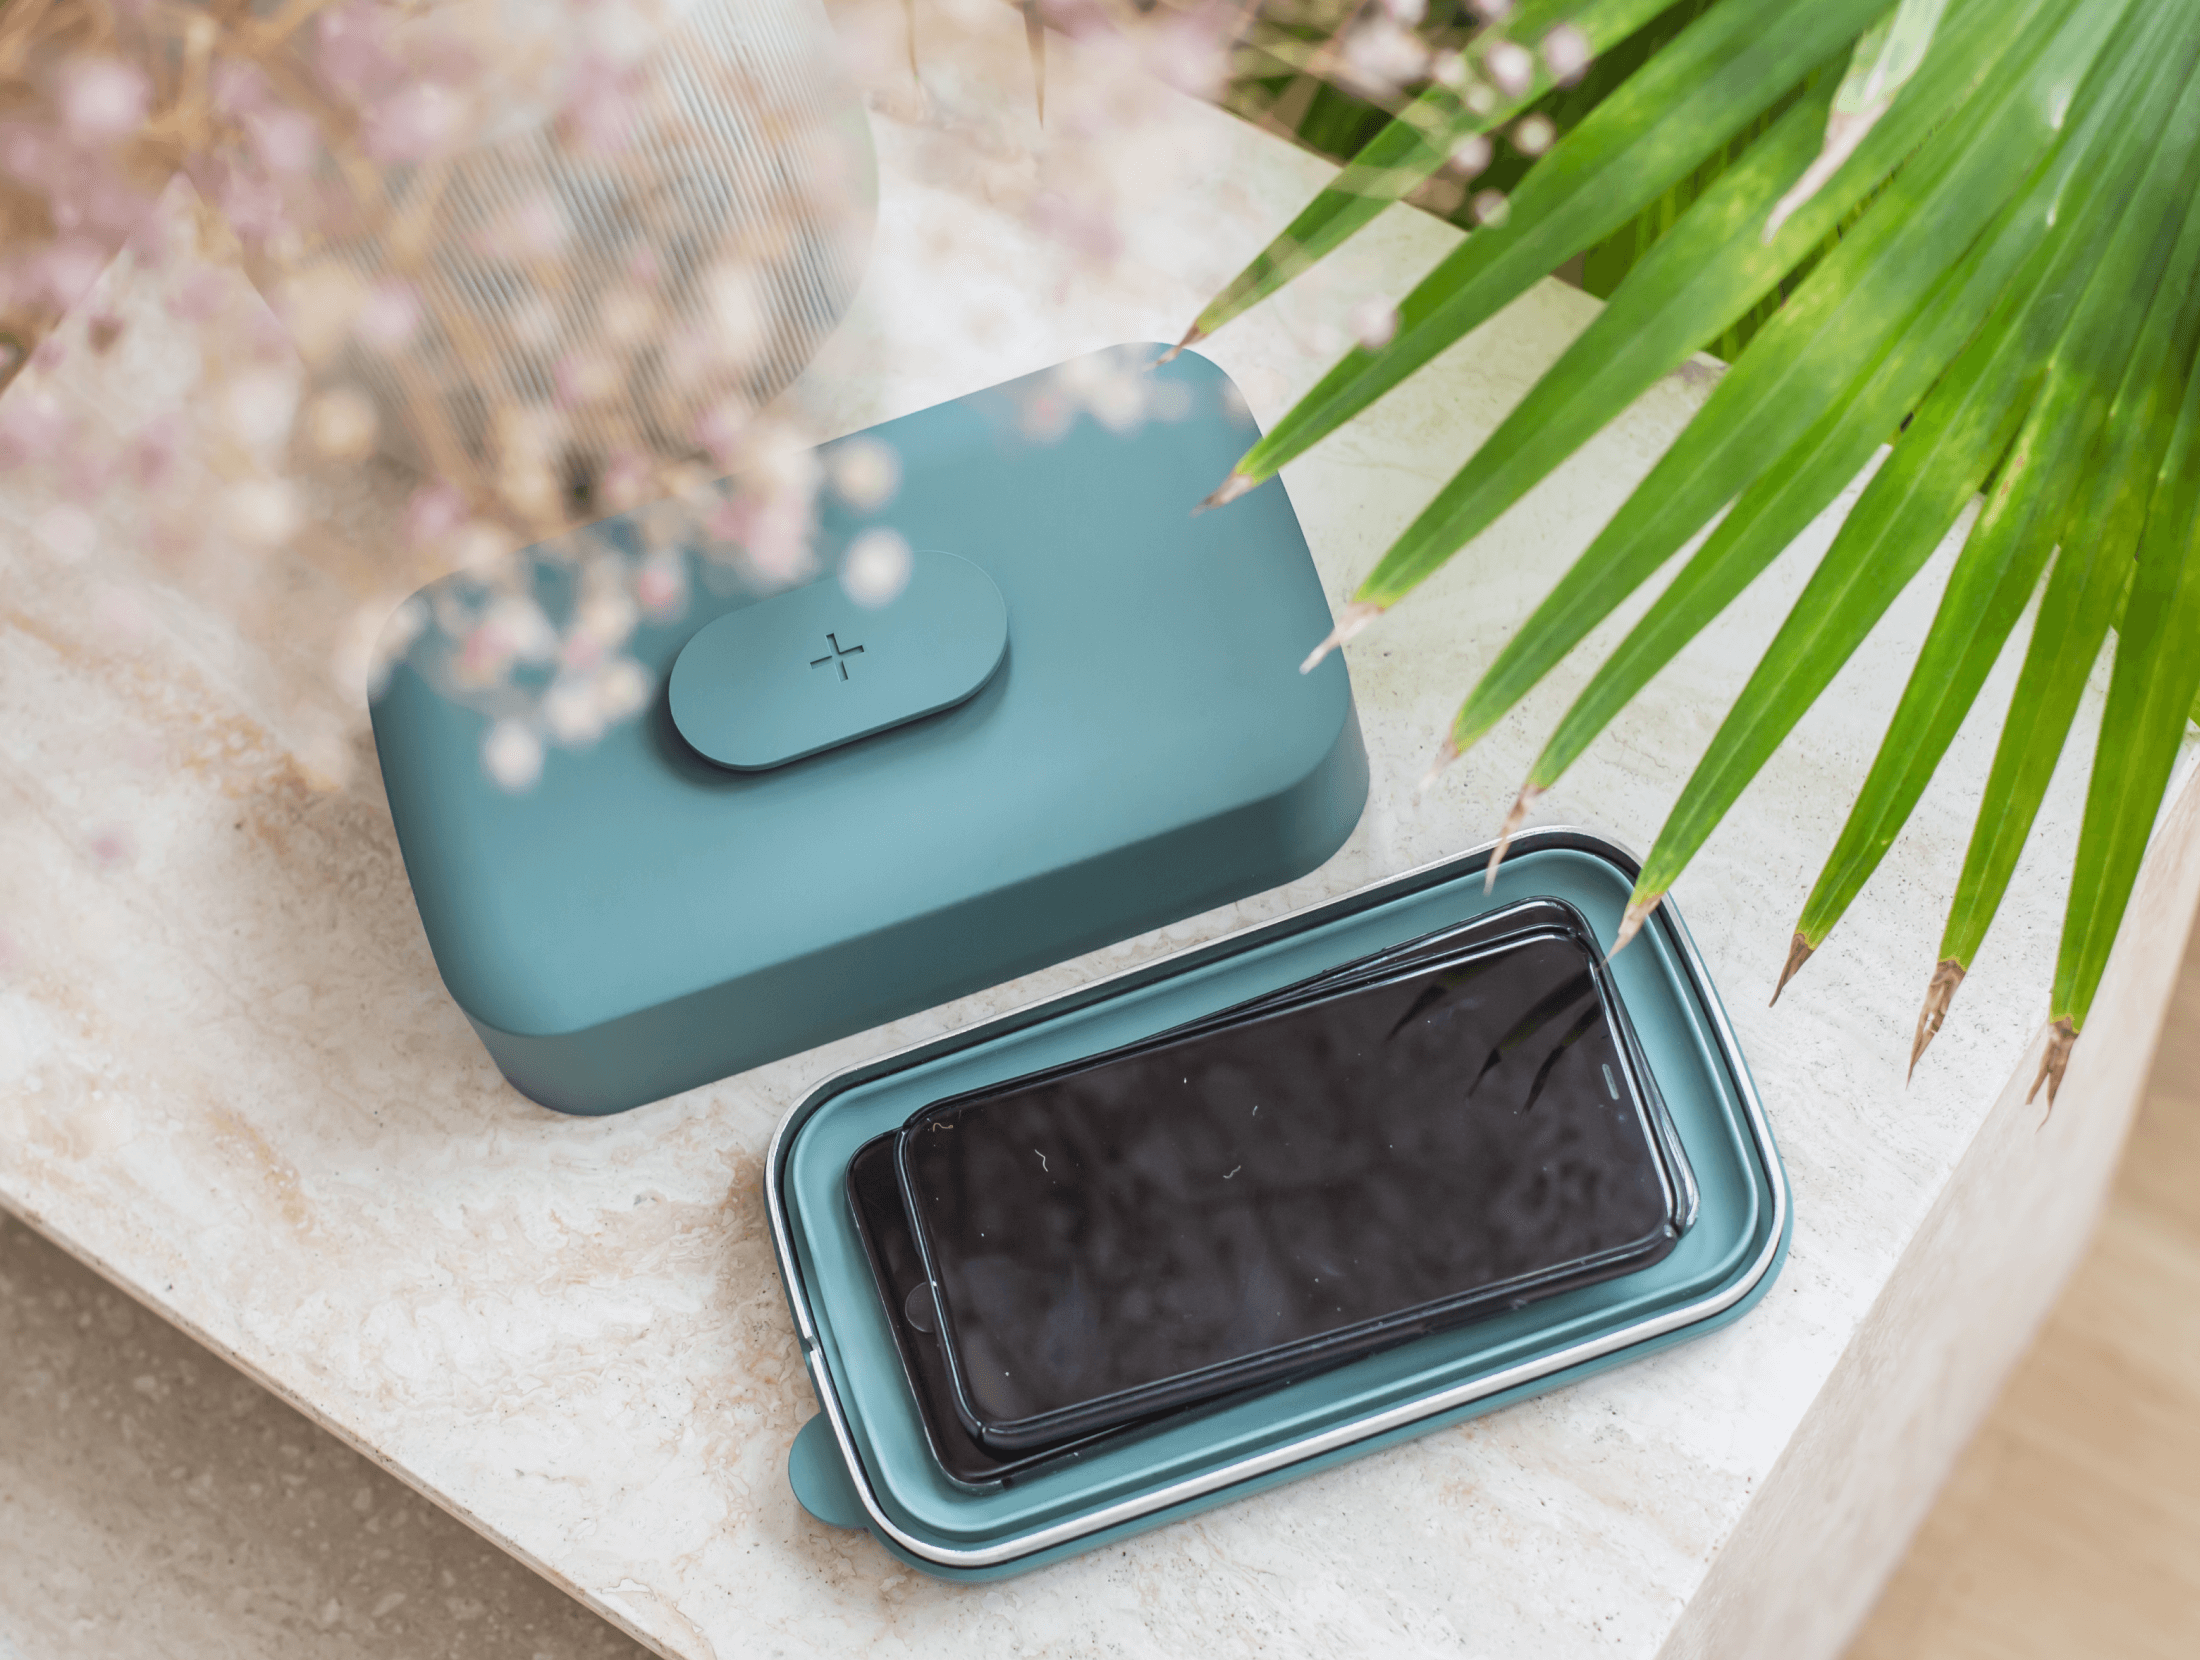 https://wisehabit.com/eng_pl_Stolp-R-Phone-Box-Faraday-Cage-Classic-Emerald-755_3.png